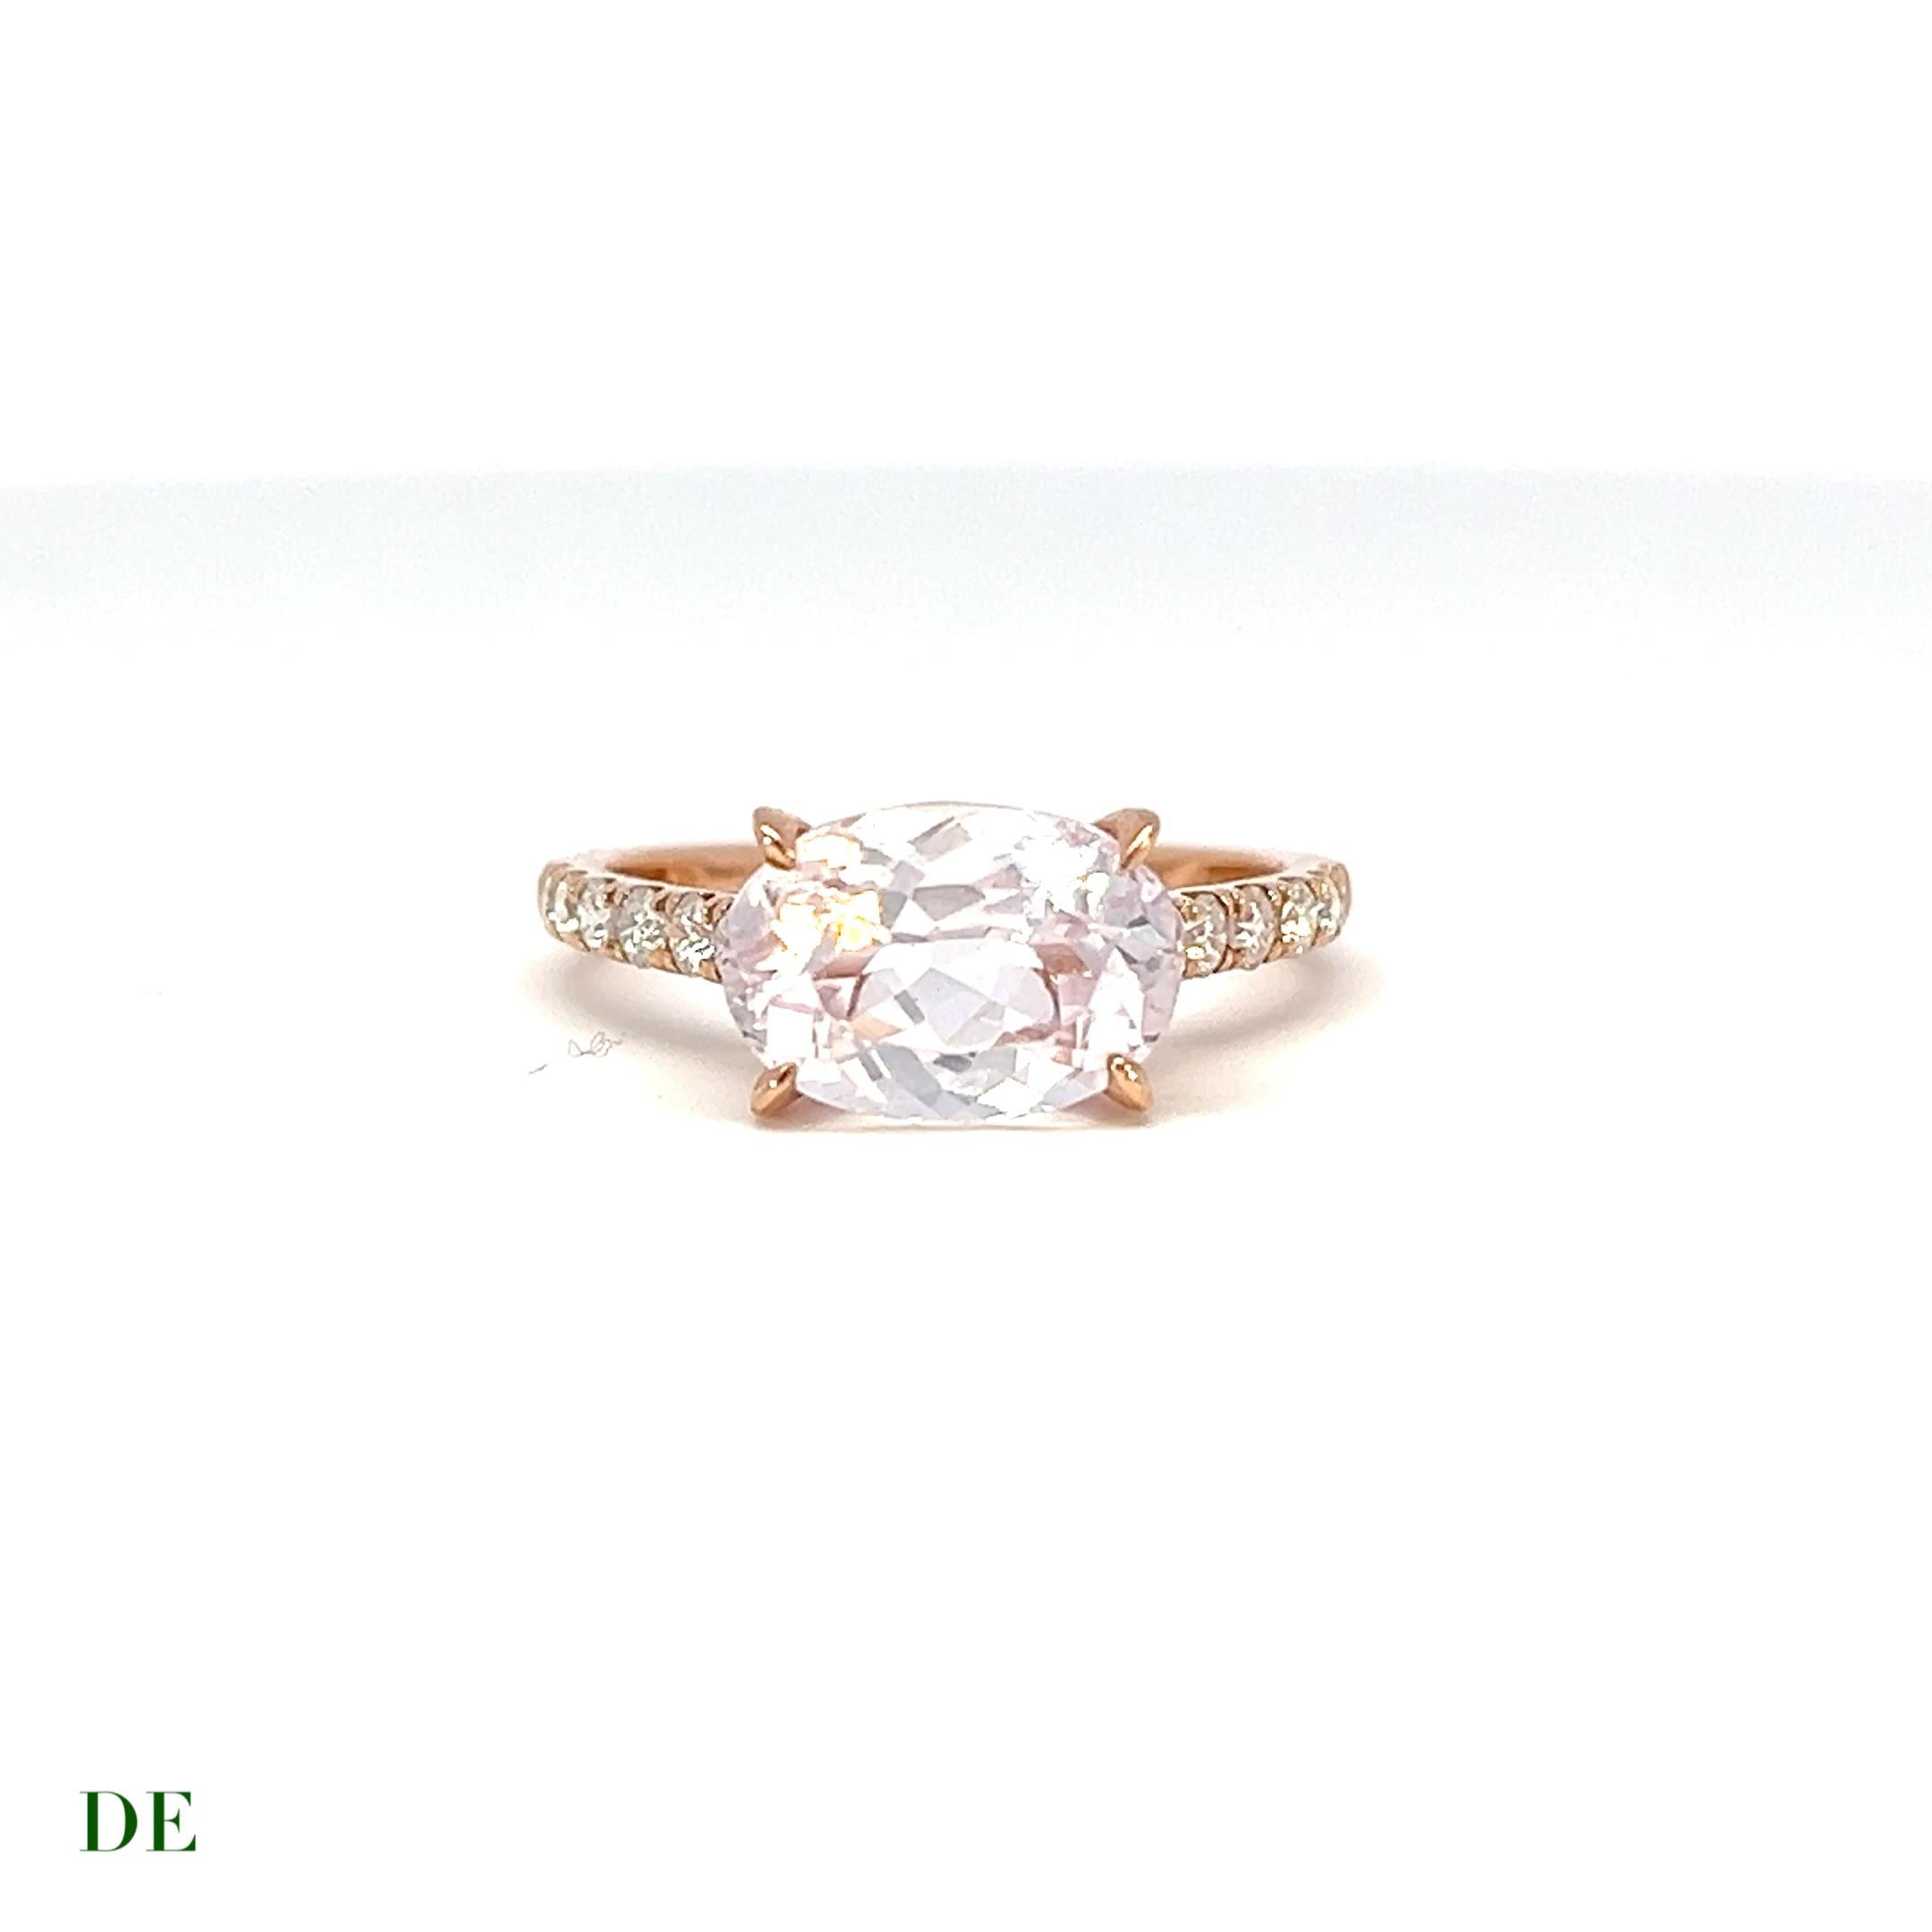 Classic 14k Rose Gold 3.08 Carat Kunzite Diamond Stylish Band .31ct Diamond Ring

Introducing the epitome of elegance and style: the Classic 14k Rose Gold 3.08 Carat Kunzite Diamond Stylish Band .31ct Diamond Ring. This exquisite piece of jewelry